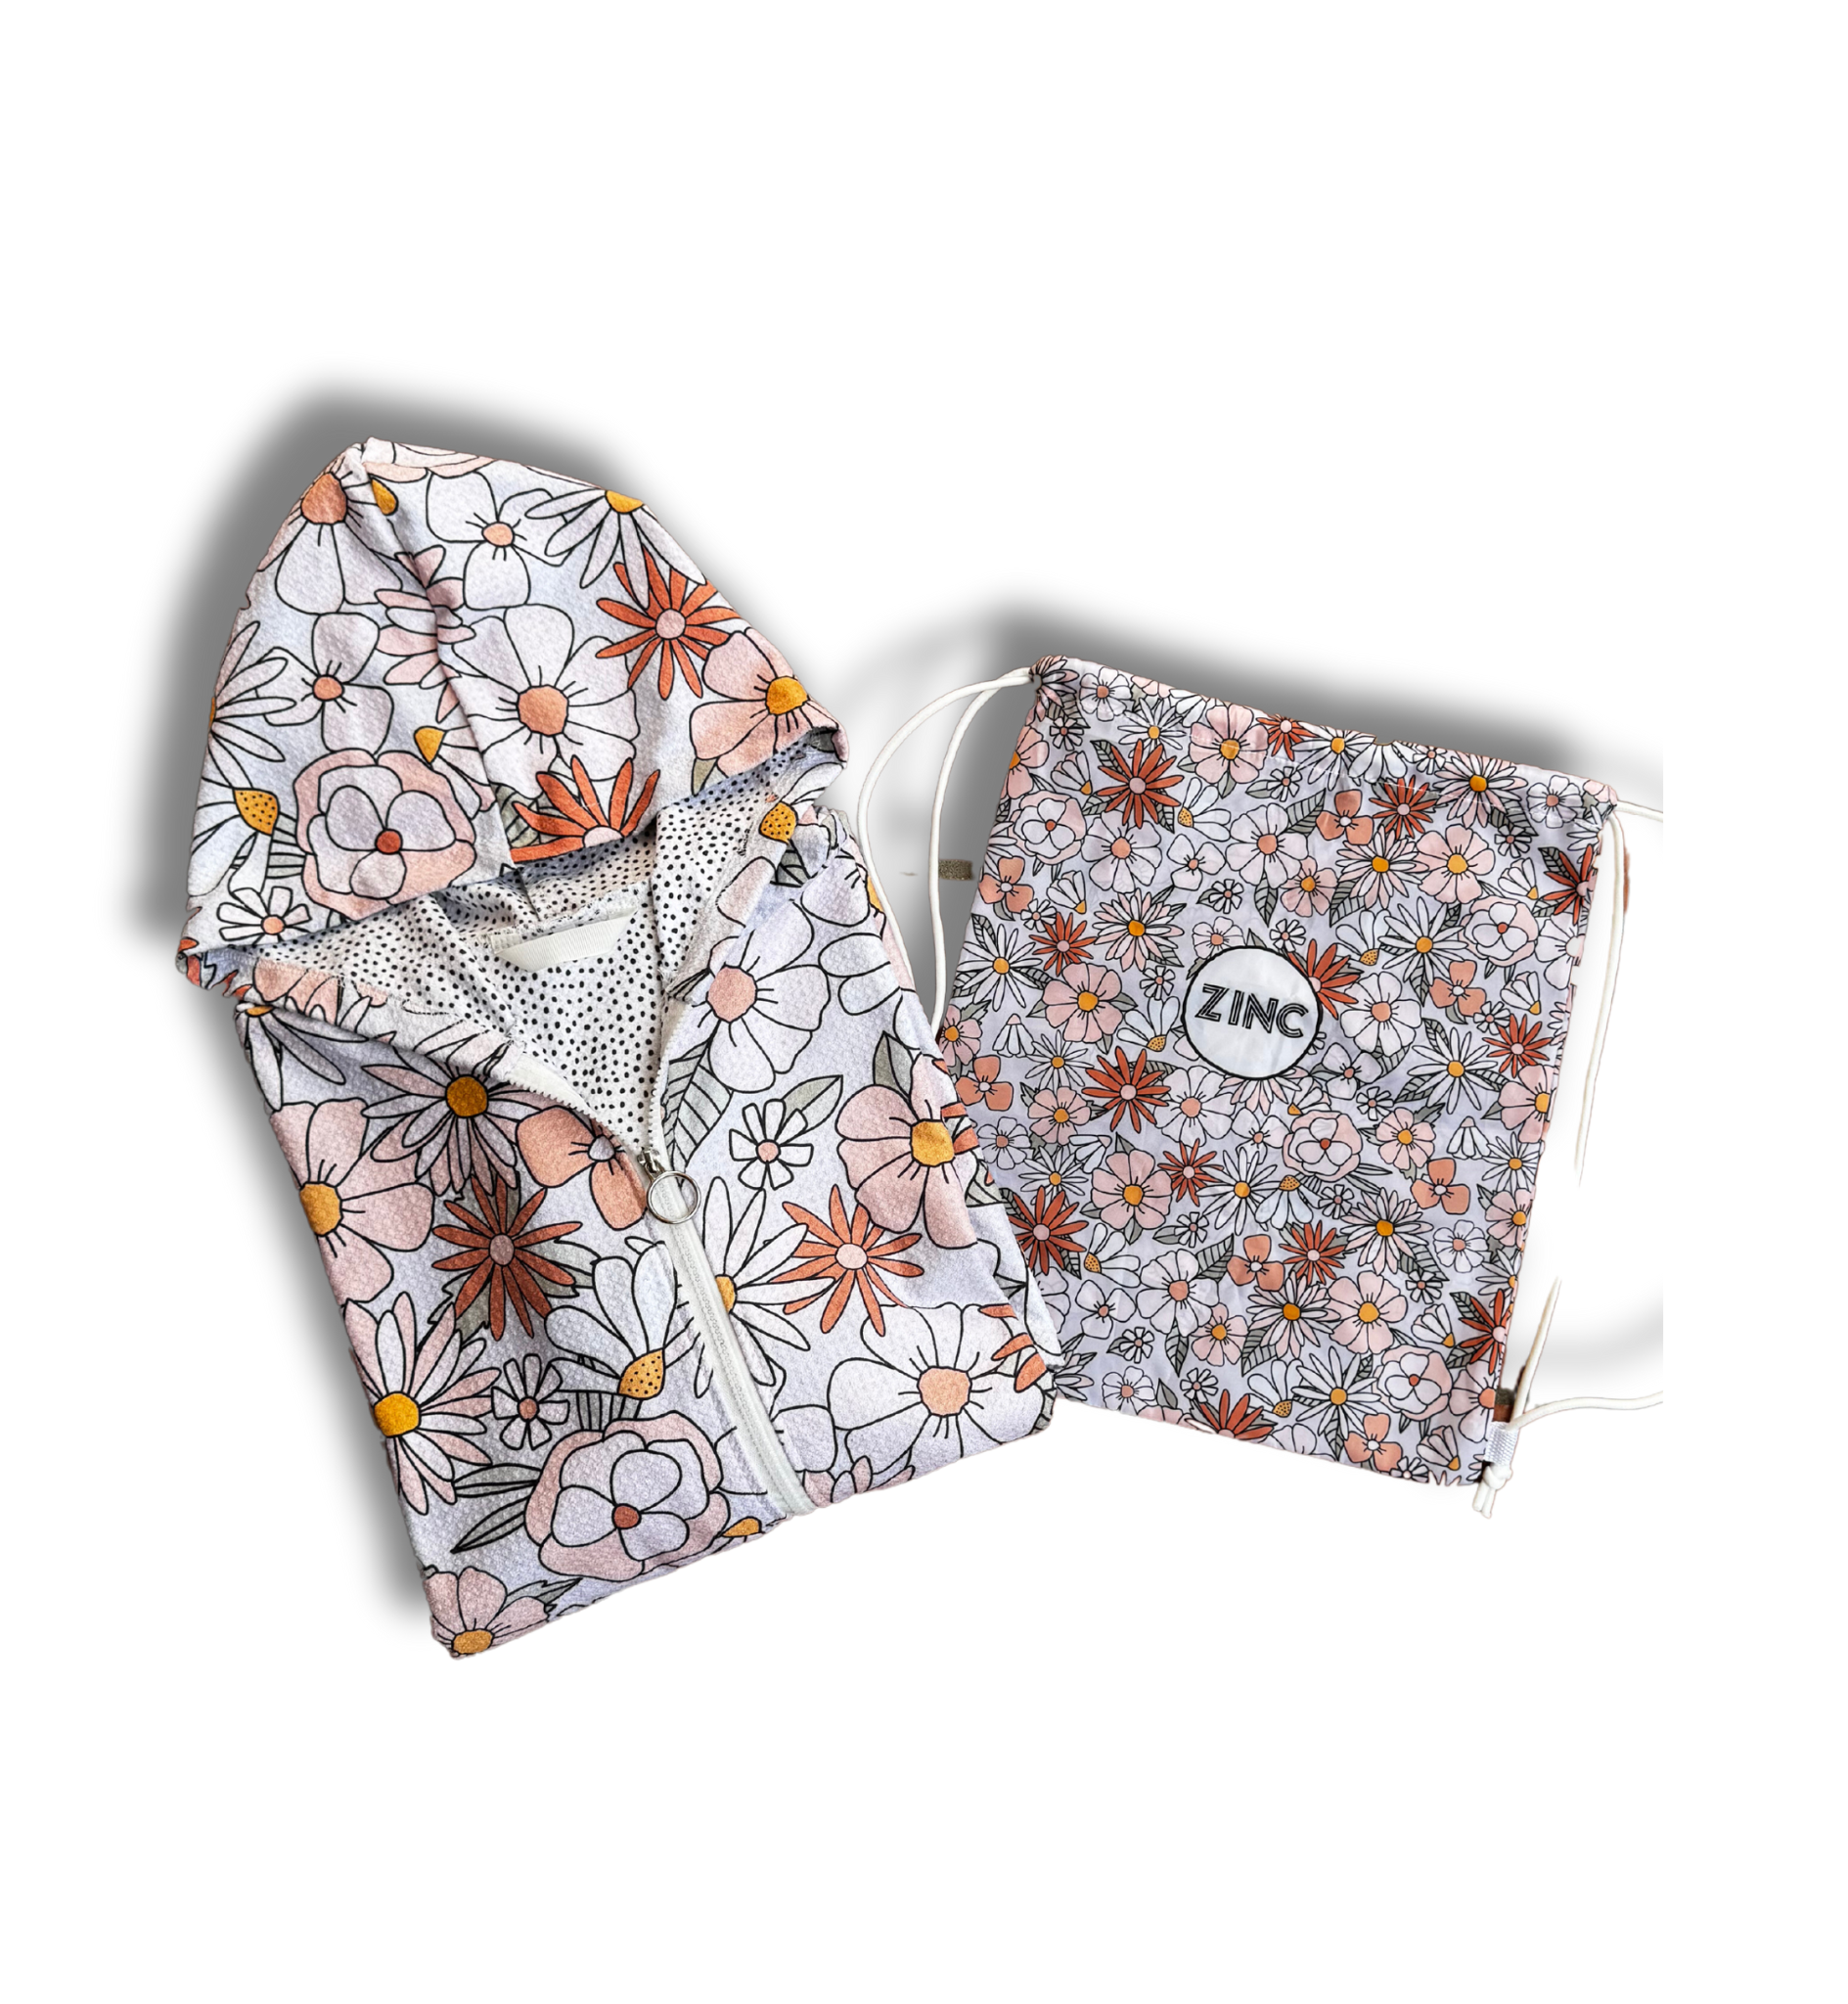 X-Small Zip Up Hooded Towel - Boho Blooms